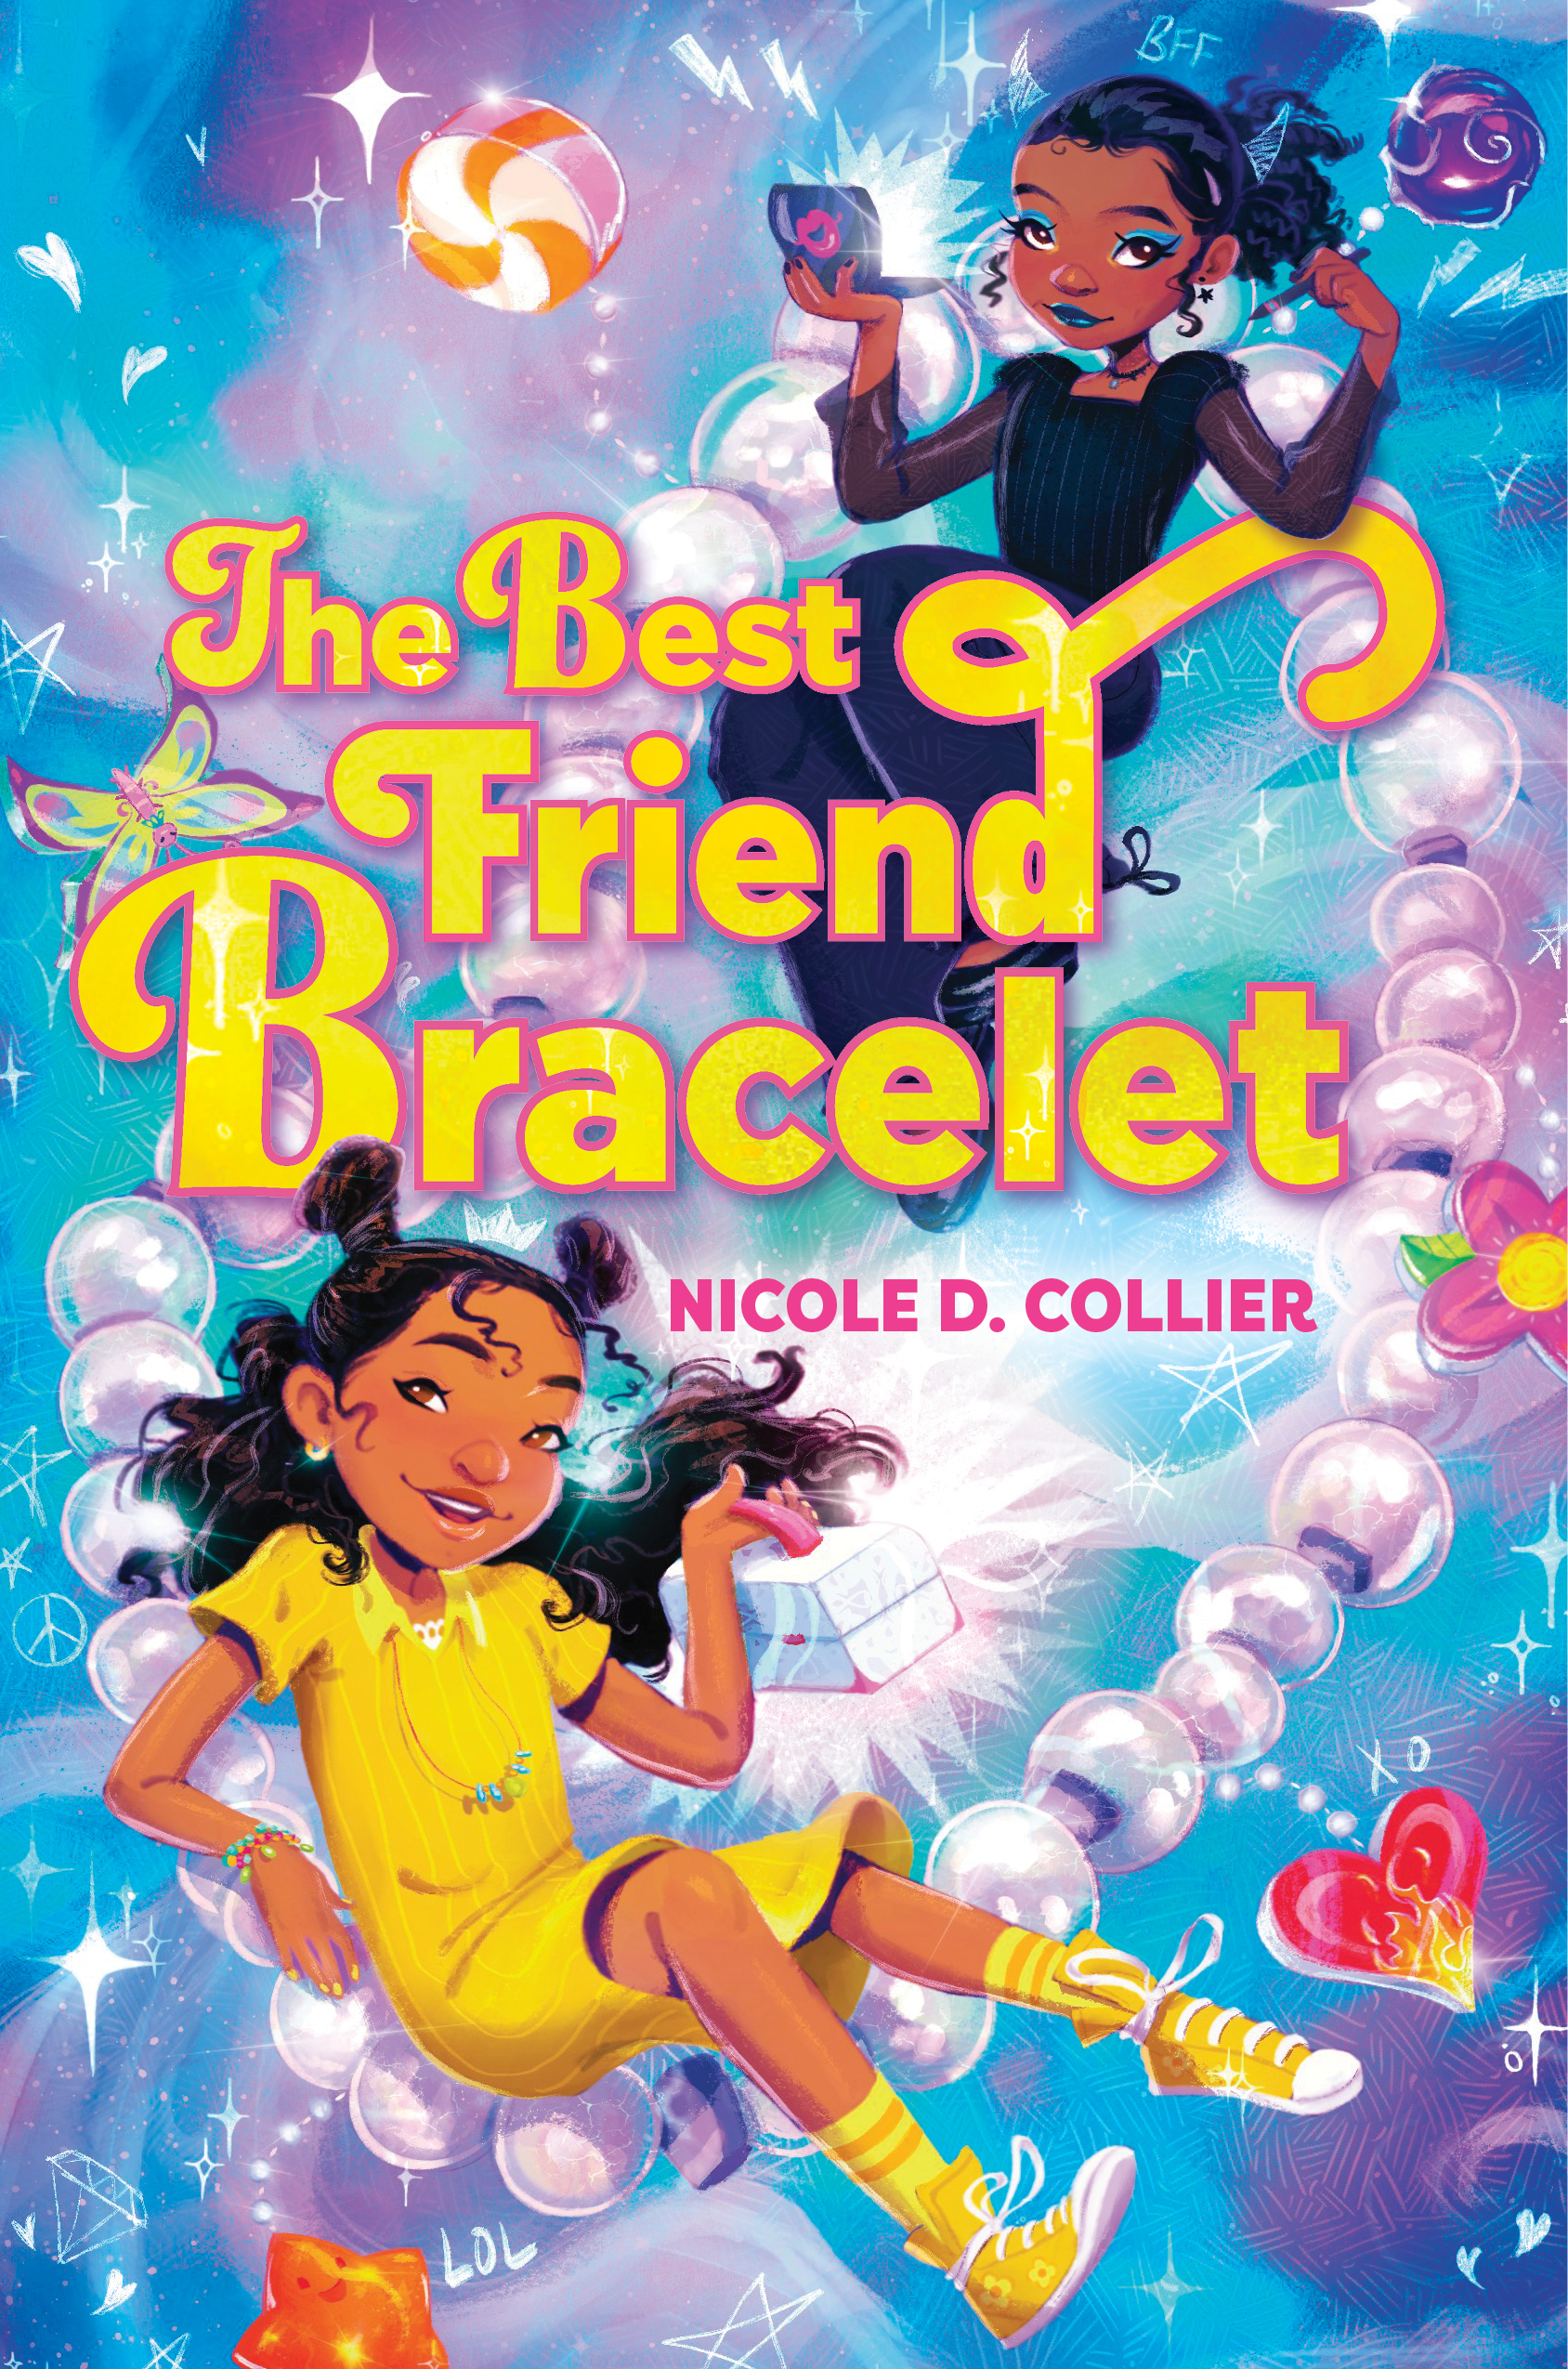 Colorful cover featuring two young Black girls - one wearing all yellow and one wearing all black. The background highlights a sparkly friendship bracelet.